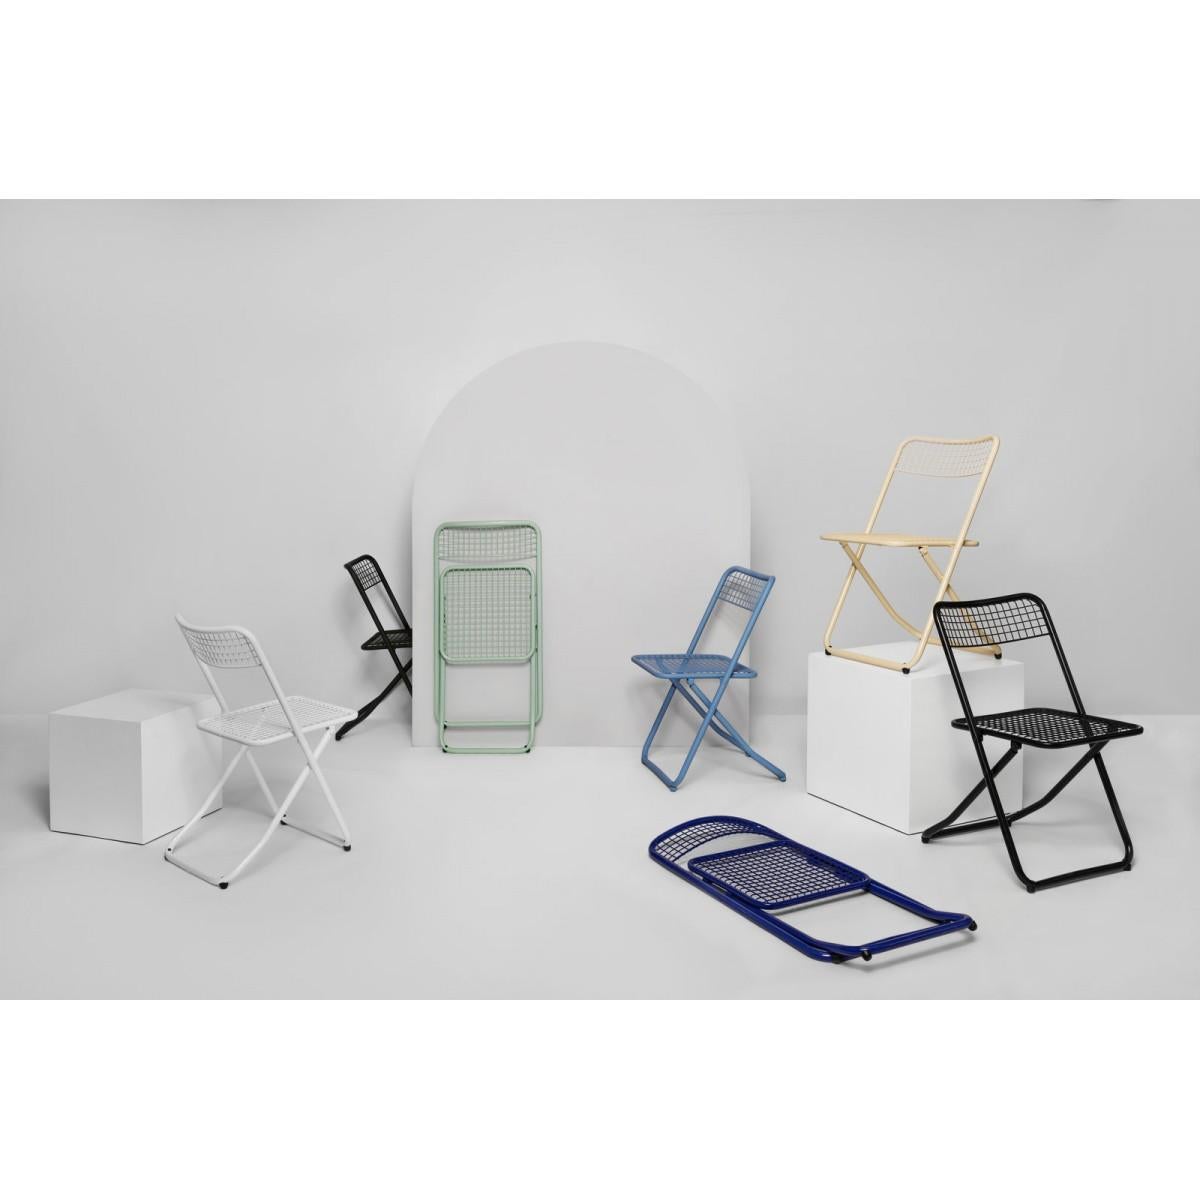 New Folding Iron Chair Yellow 1026 by Houtique & Masquespacio Signed 2